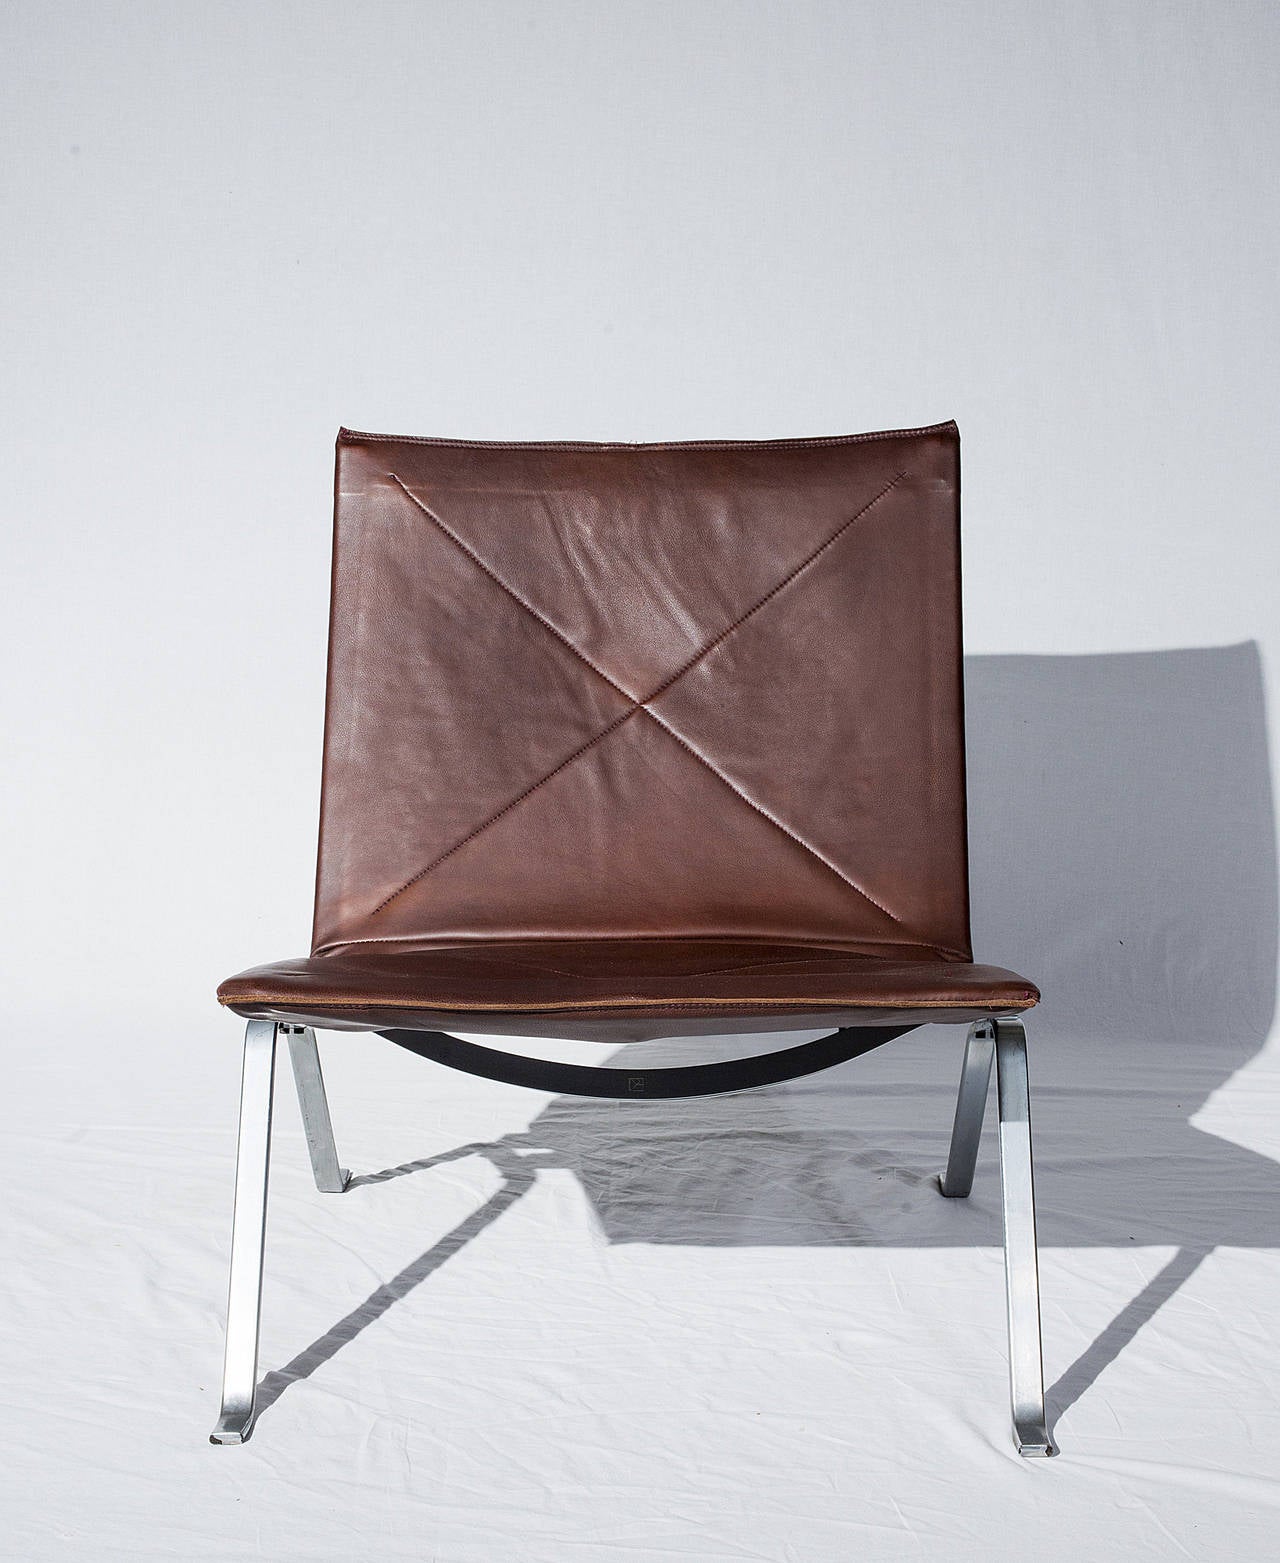 Pair of Poul Kjaerholm lounge chairs designed in 1956 and produced
by E Kold Christensen. Chairs are signed with E Kold Christensen's mark.
Chairs have been reupholstered in new brown leather.